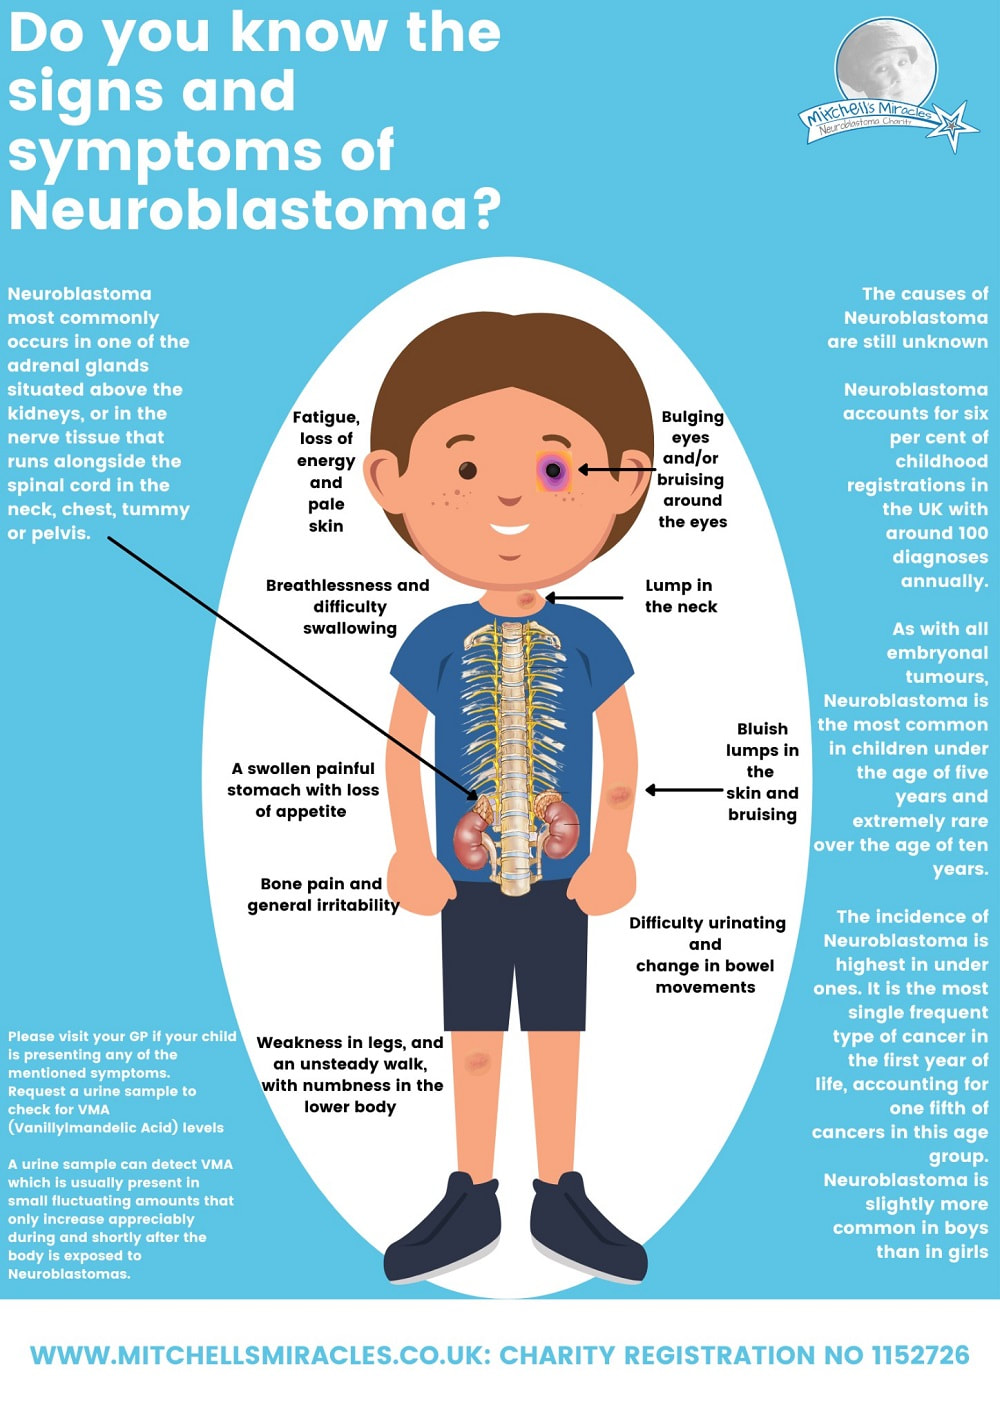 Info graphic showing the signs and symptoms of a child with Neuroblastoma childhood cancer